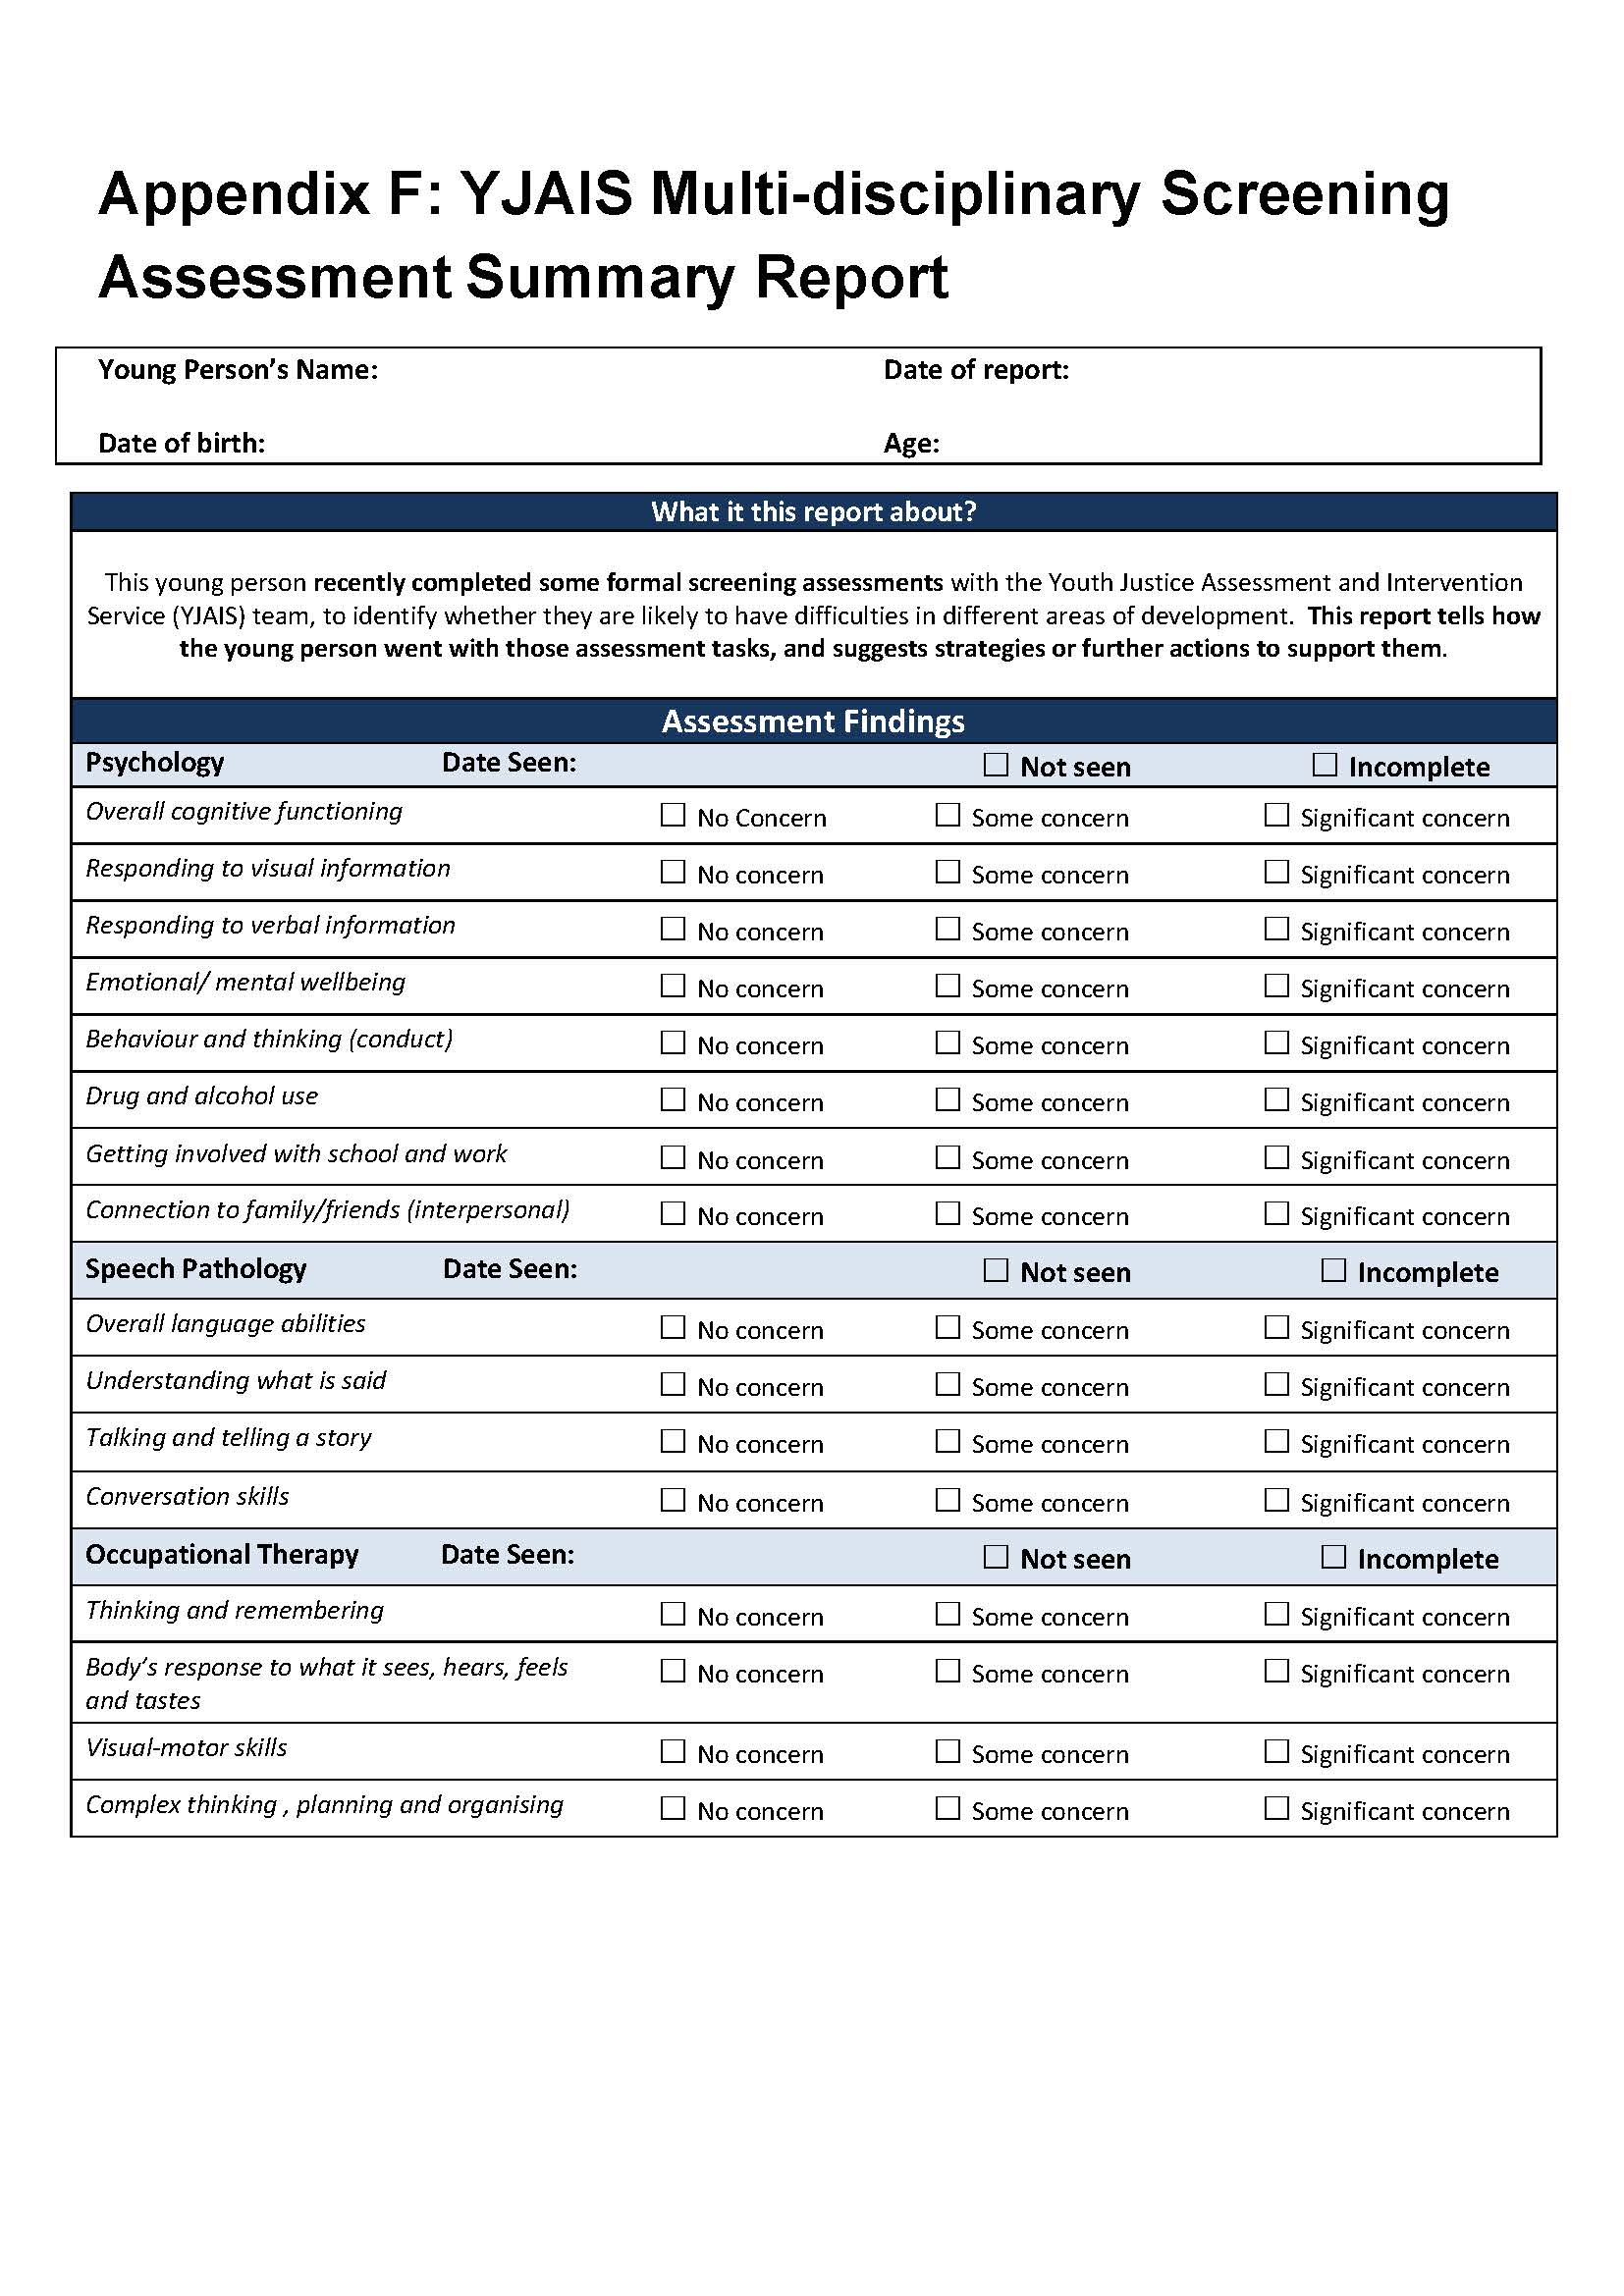 YJAIS multi-disciplinary screening assessment summary report. This form has two pages. This form describes how the young person went with the assessment tasks, and suggests strategies or further actions to support the person.